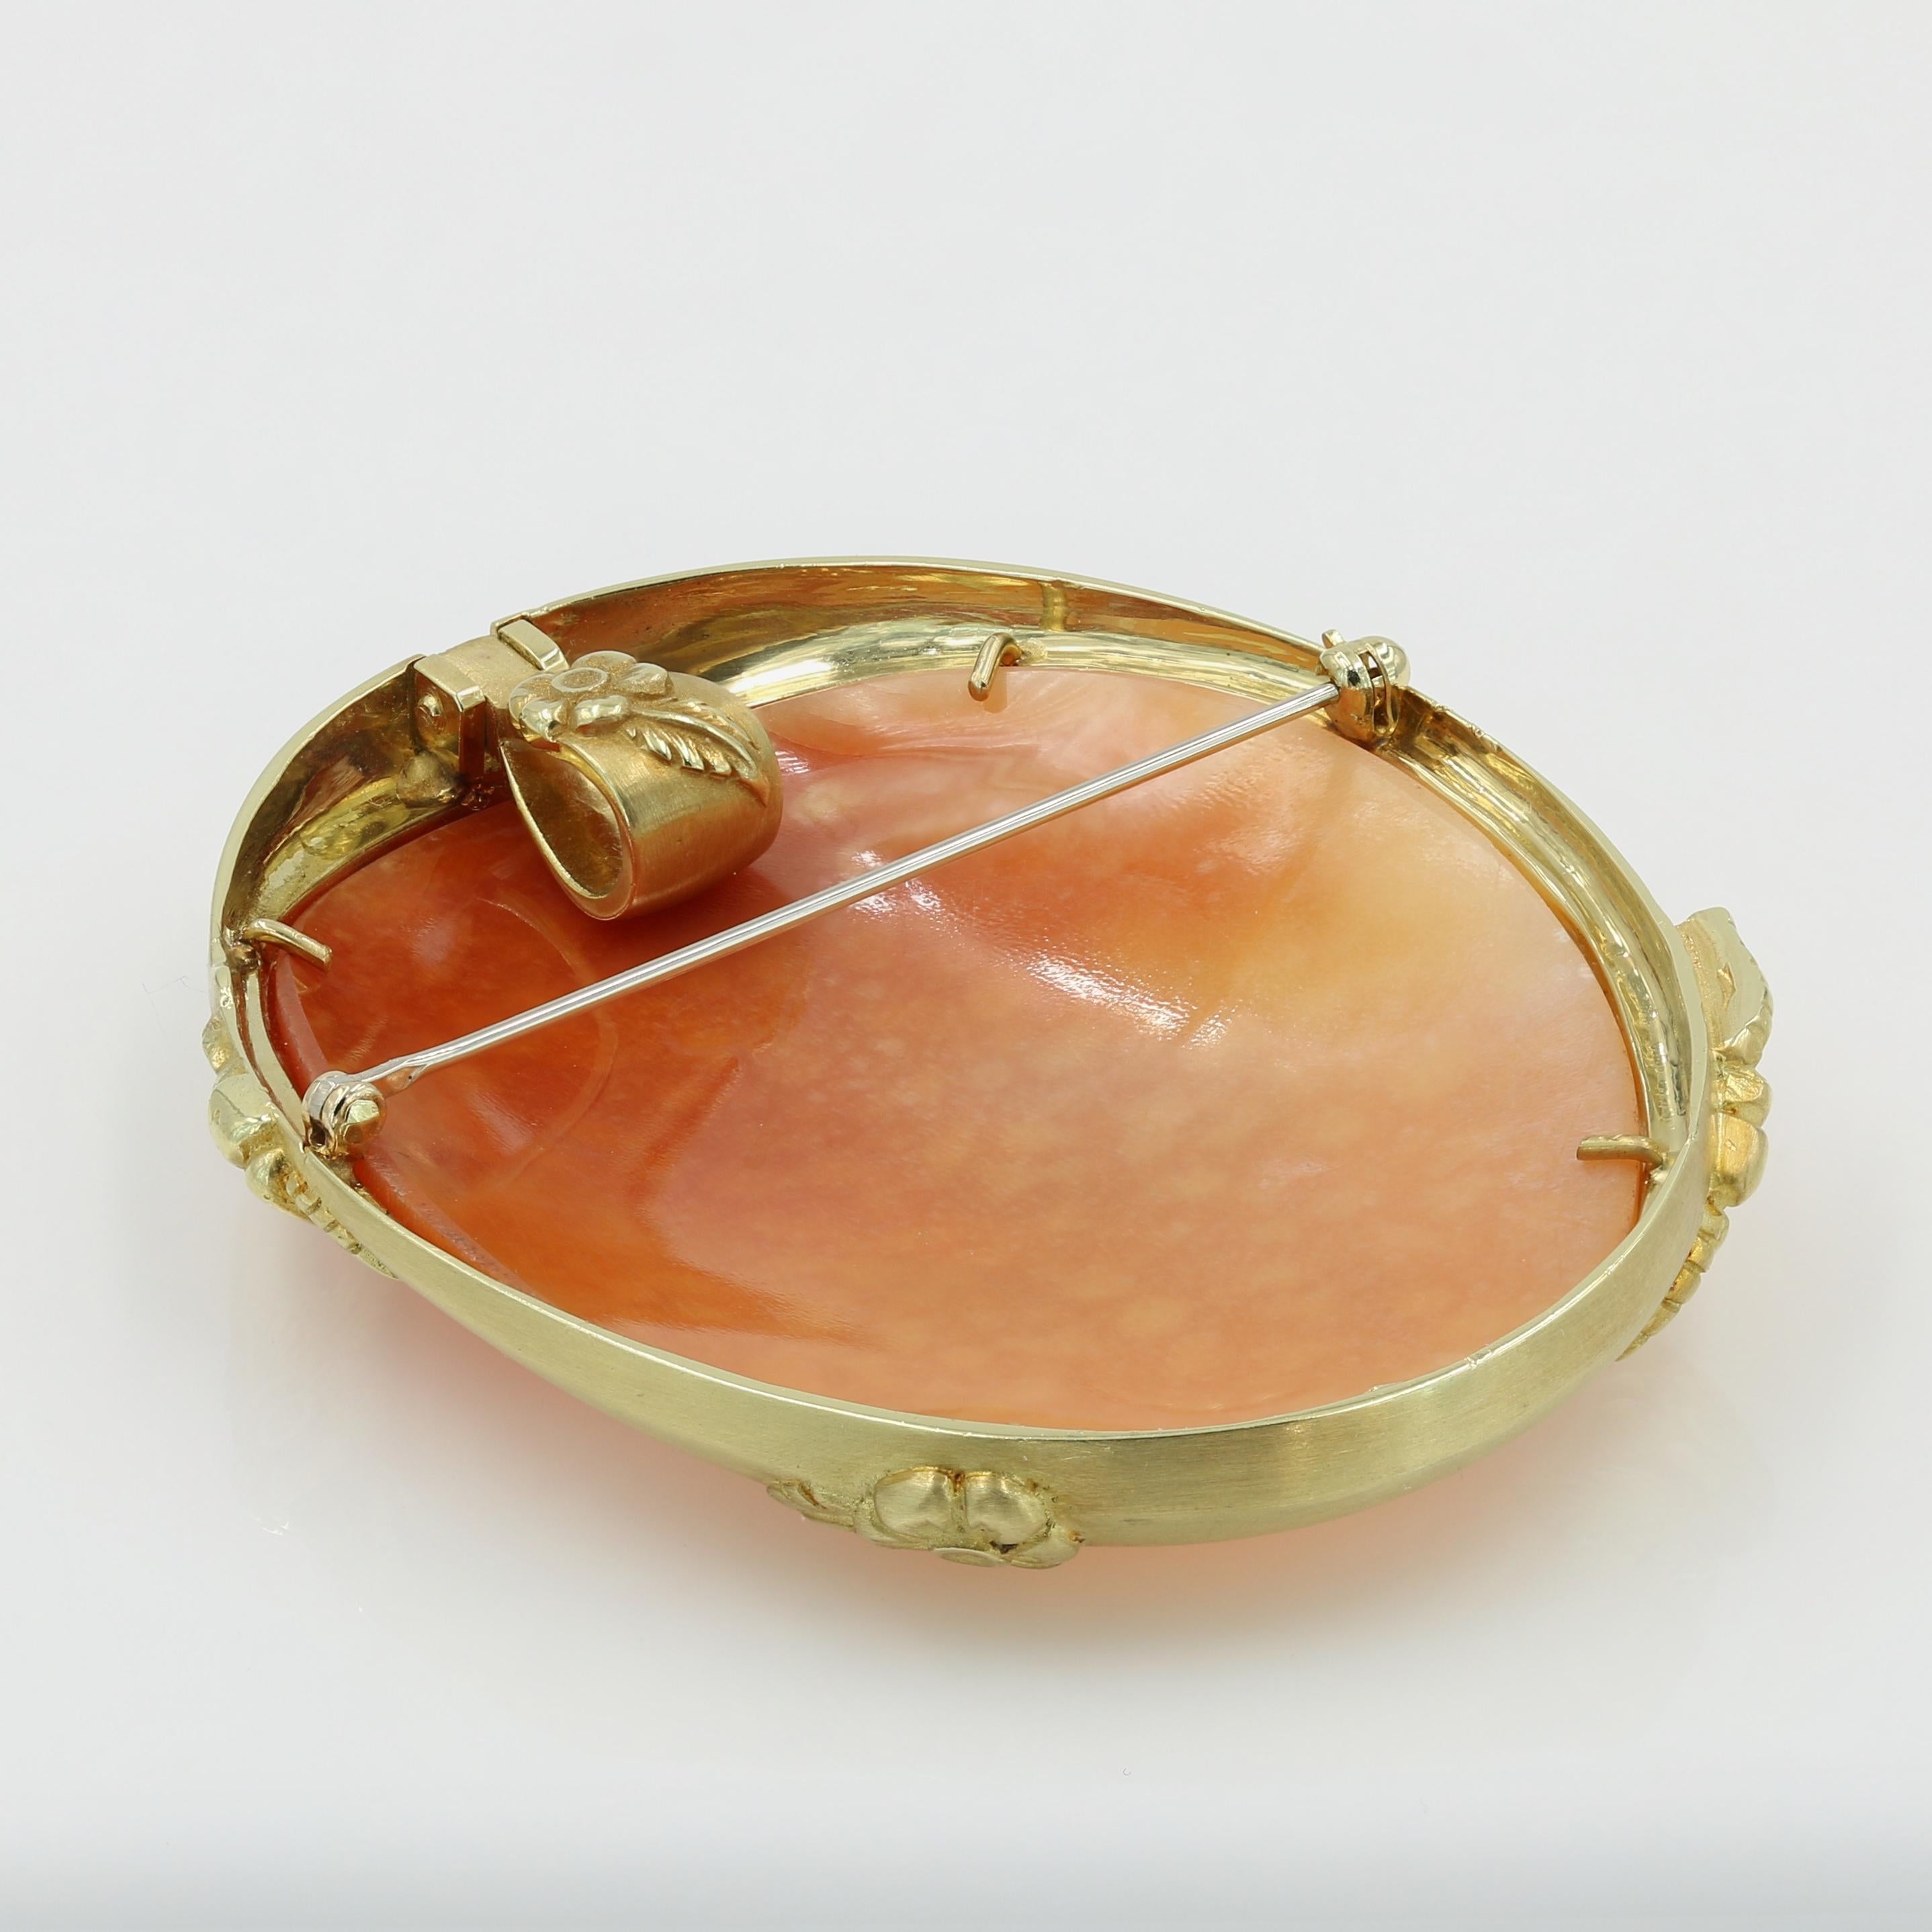 Lester Lampert One of a Kind Cameo Pin/Pendant in 18 Karat Yellow Gold In Excellent Condition For Sale In Chicago, IL